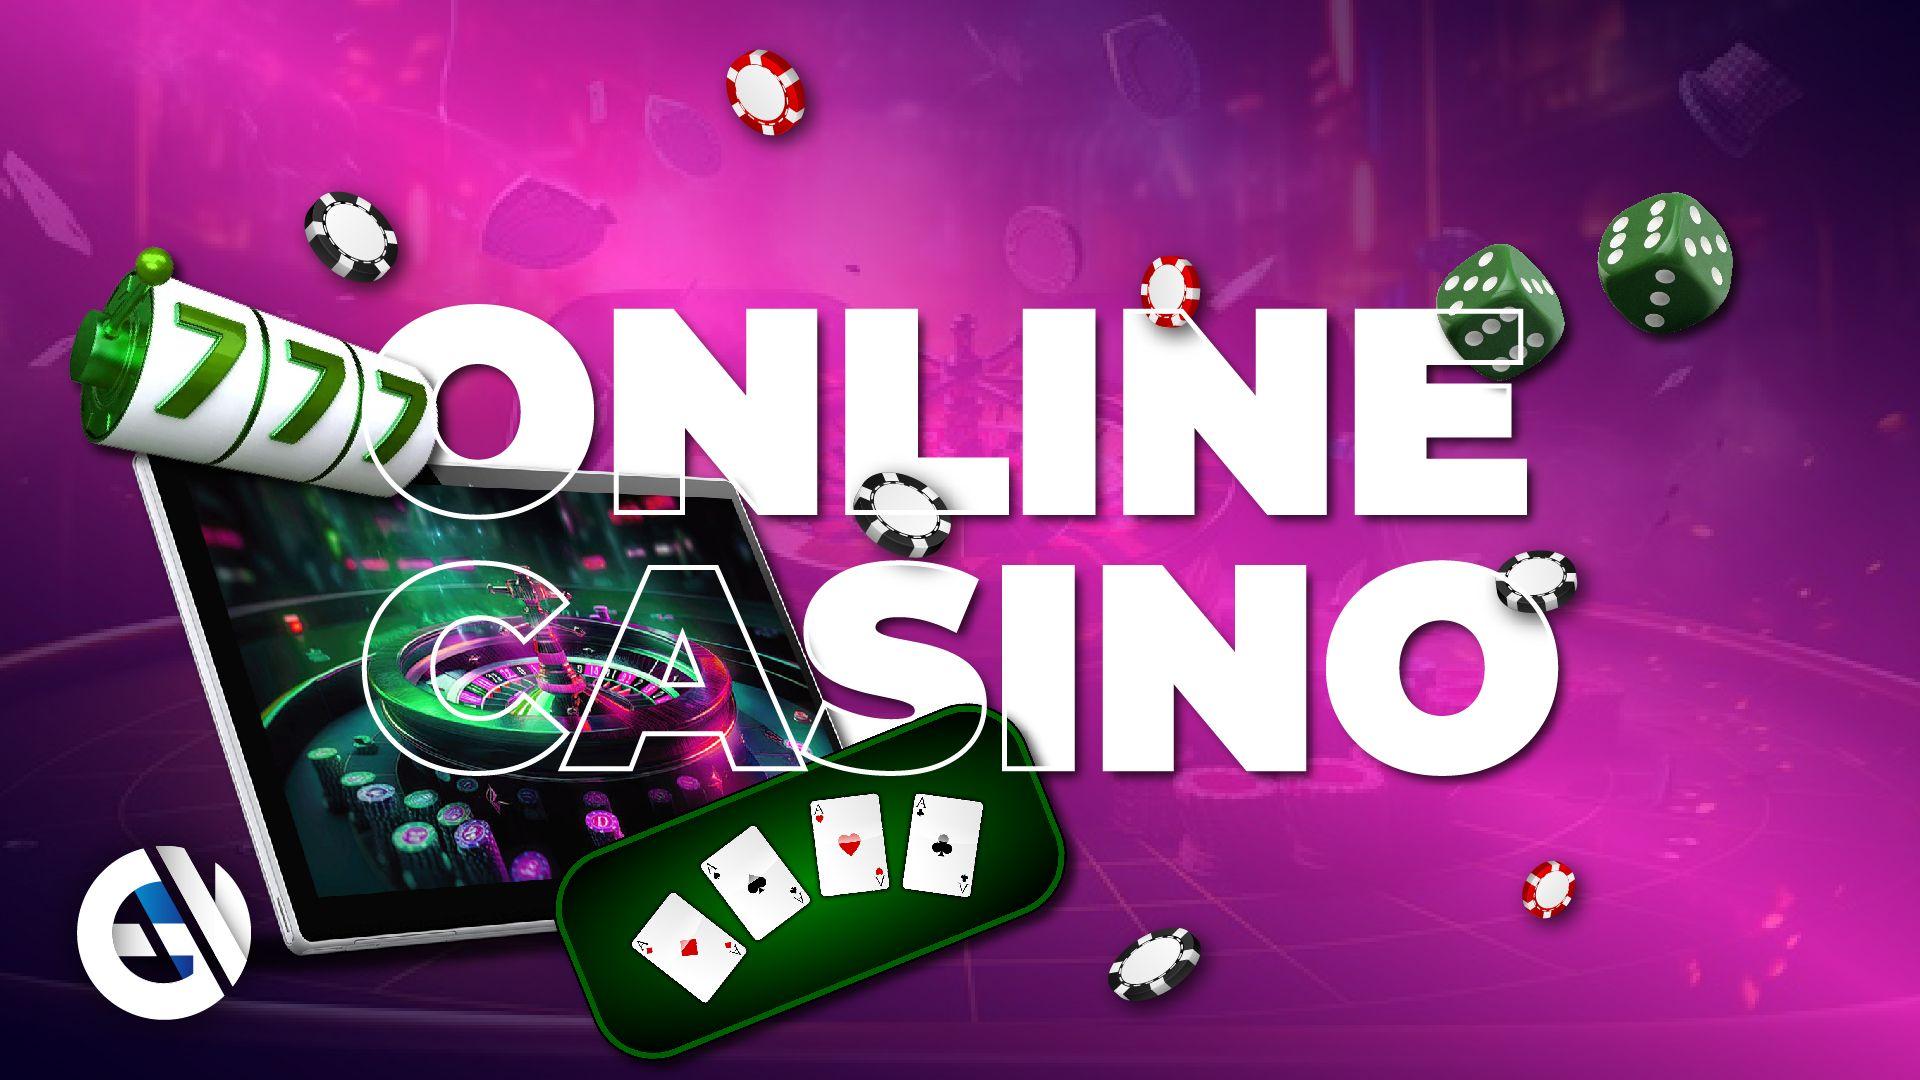 How to win big at online casinos?